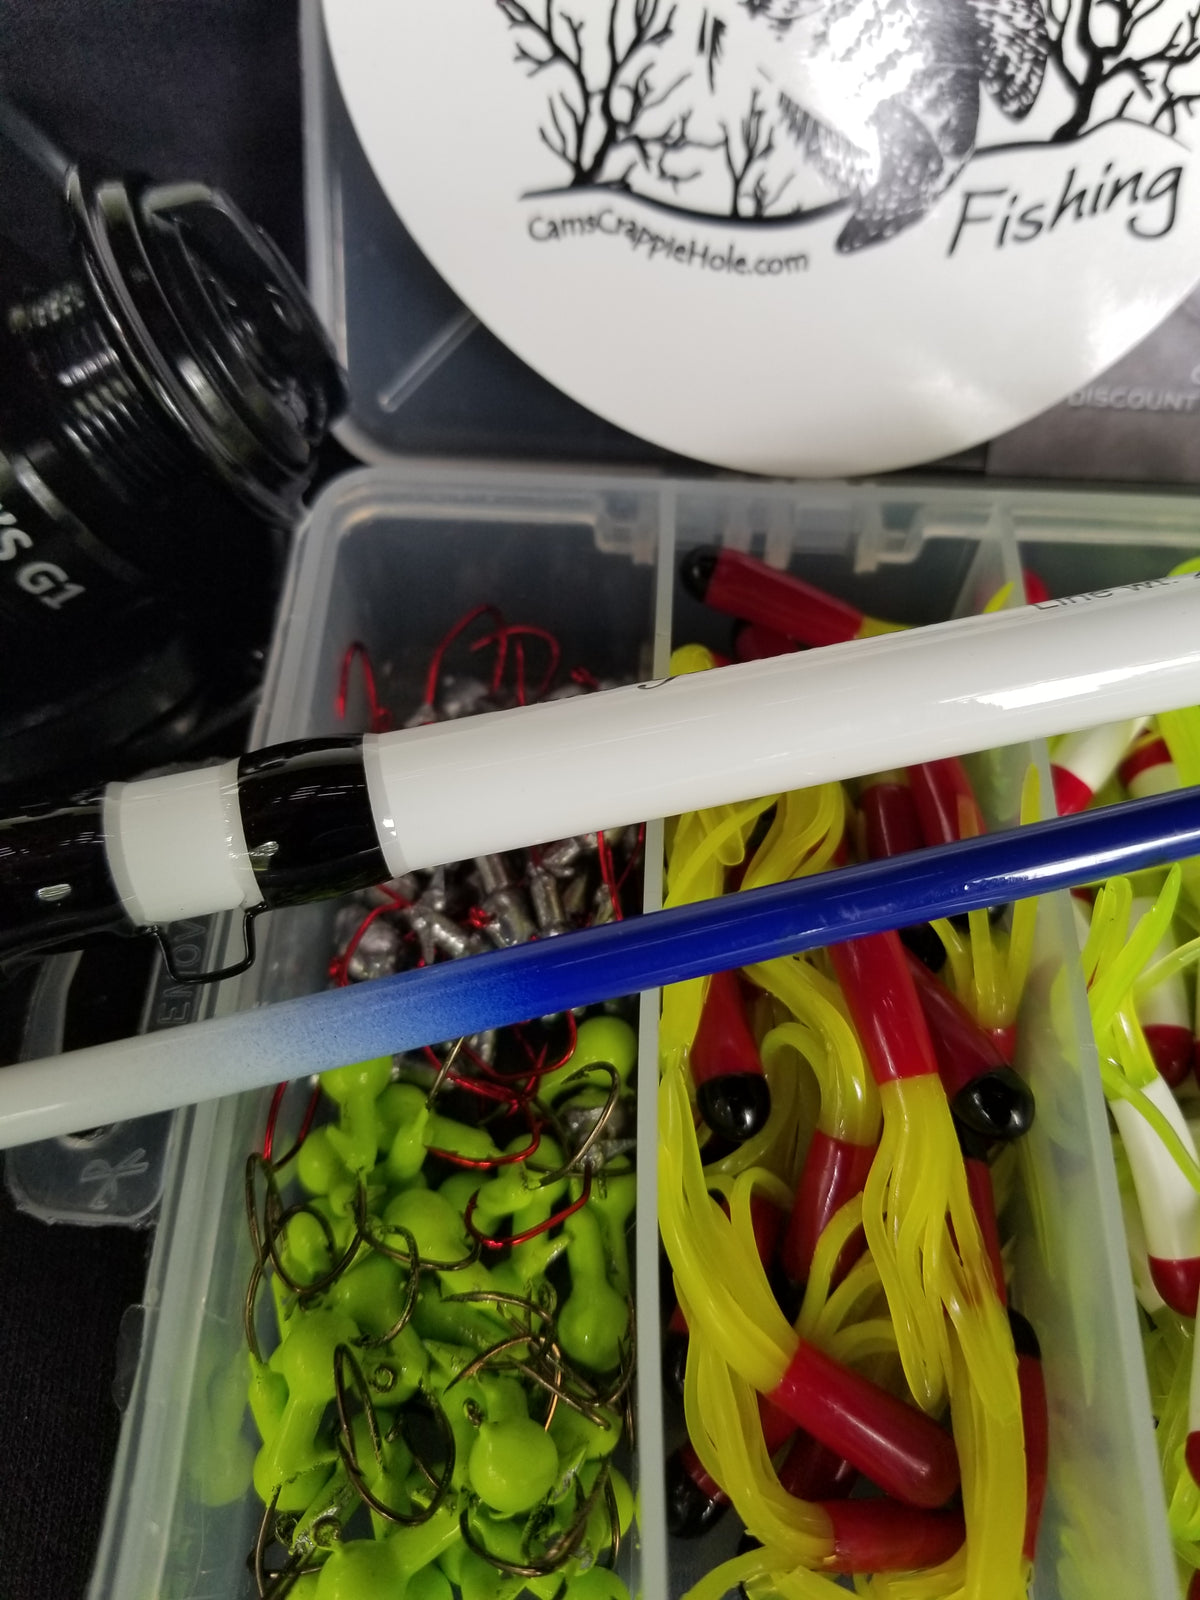 Cam's 10ft Yaannk Stick Combo Rod and Reel Tri-Color Tube Kit